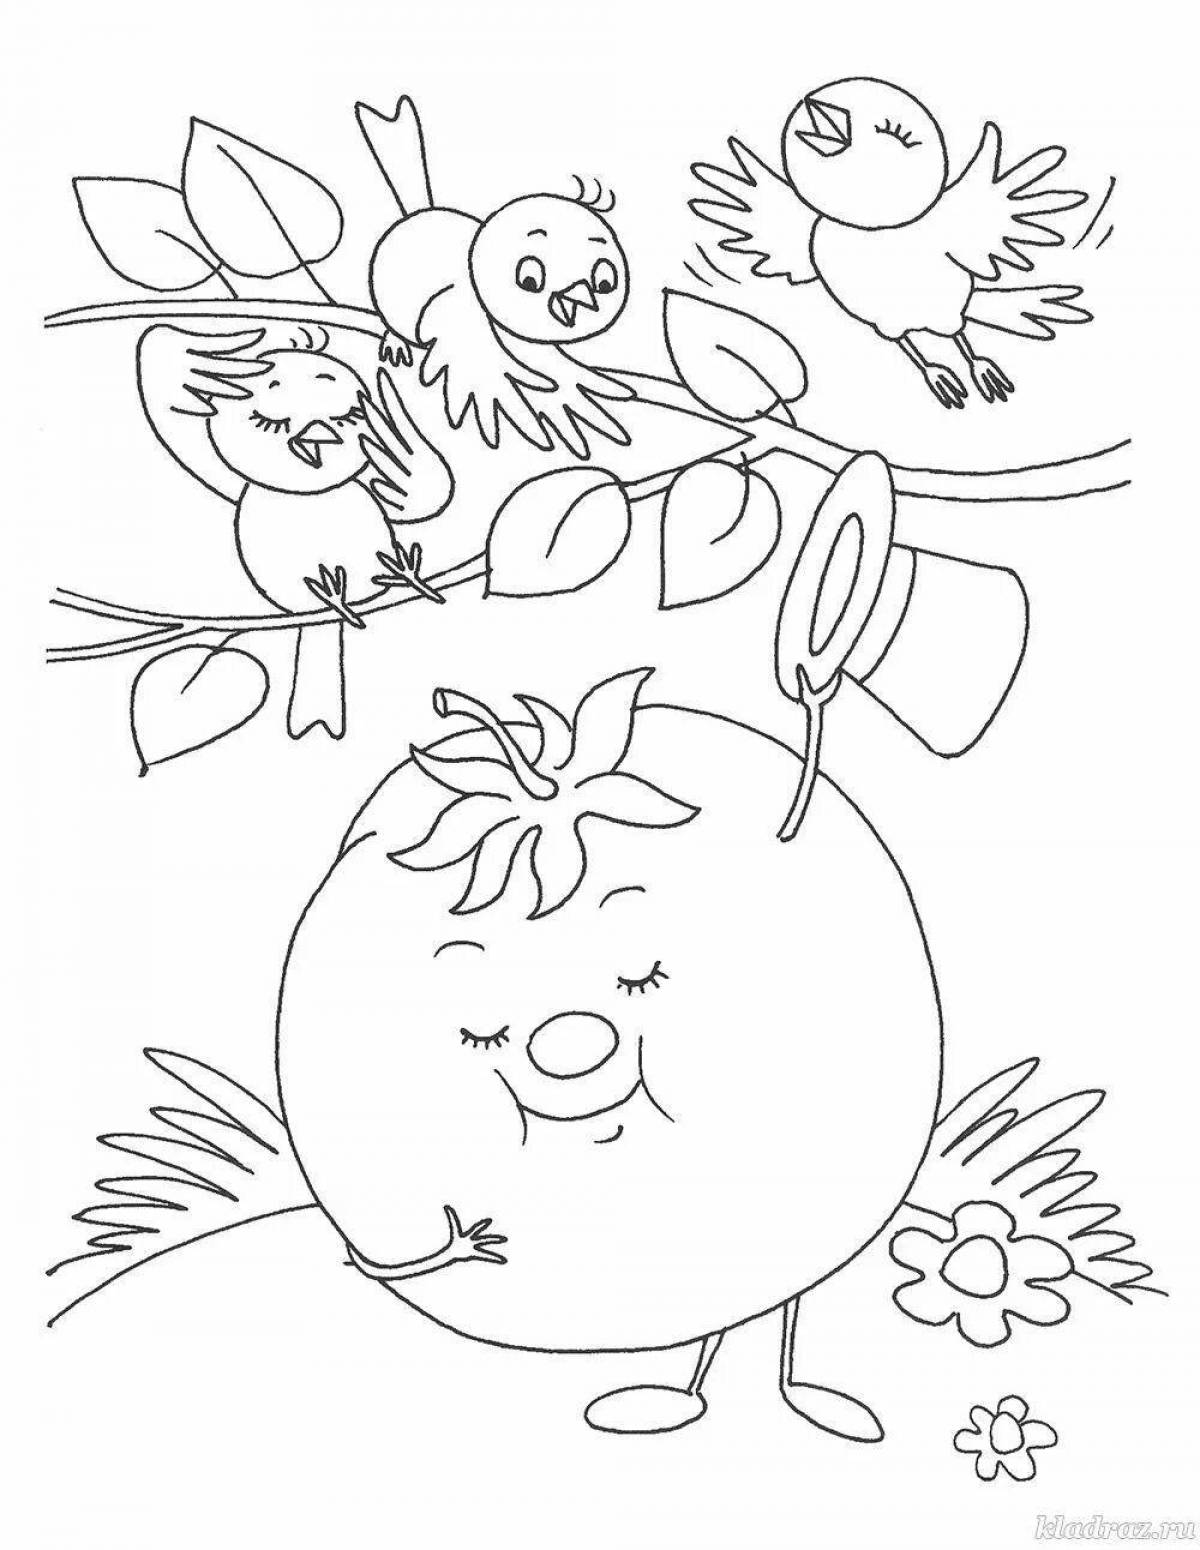 Fun coloring puzzles for kids